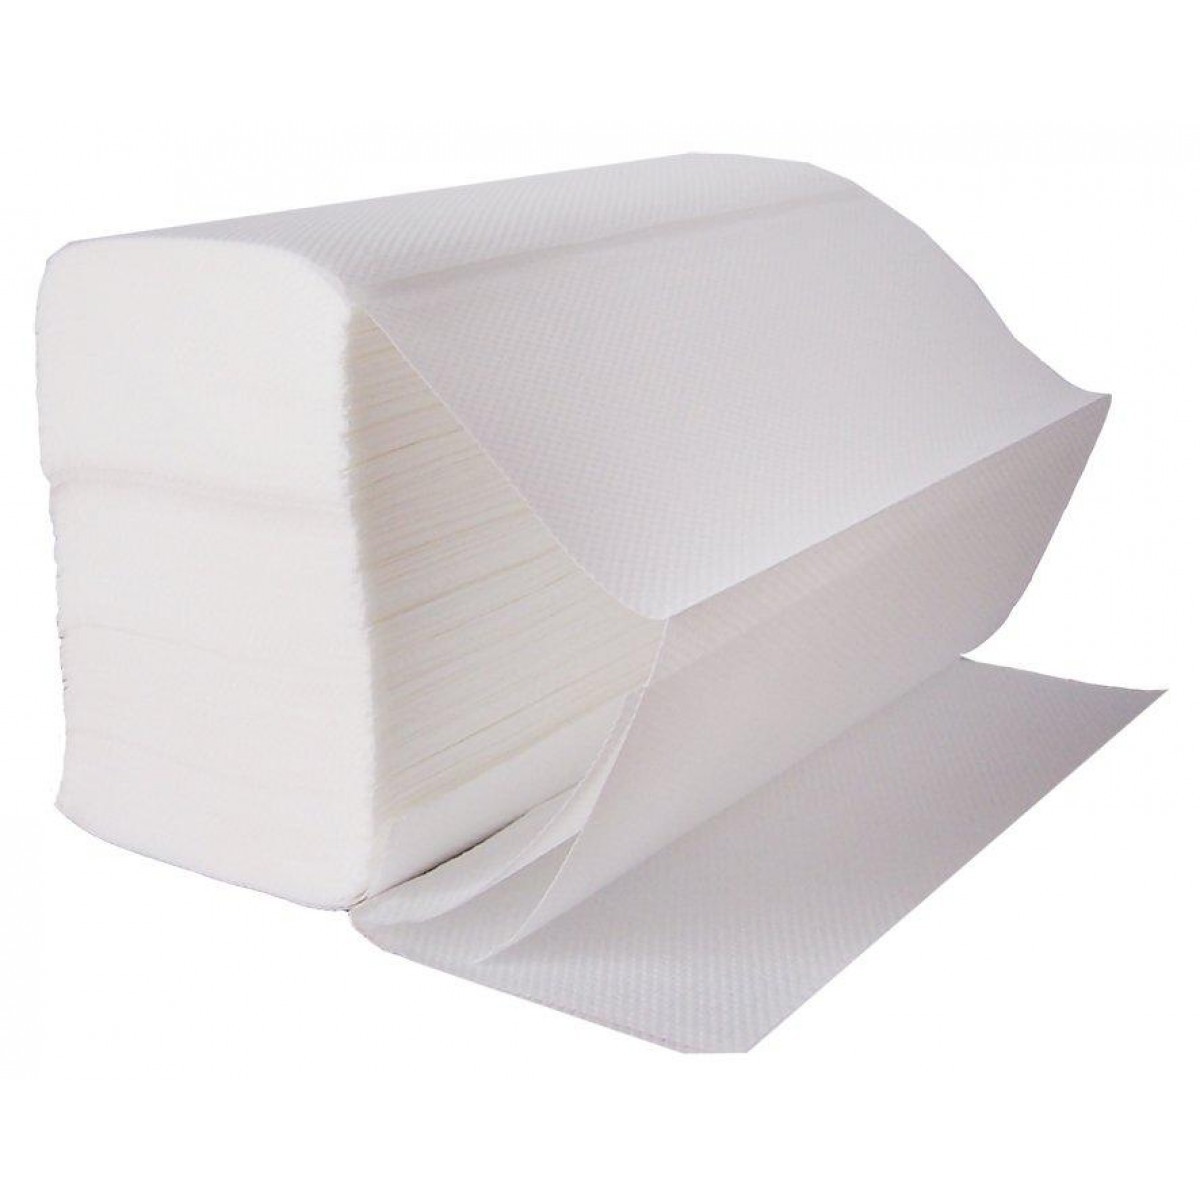 Z Fold Soft Hand Paper Towel Disposable Luxury PAPER White 3000 2ply INTERFOLD 